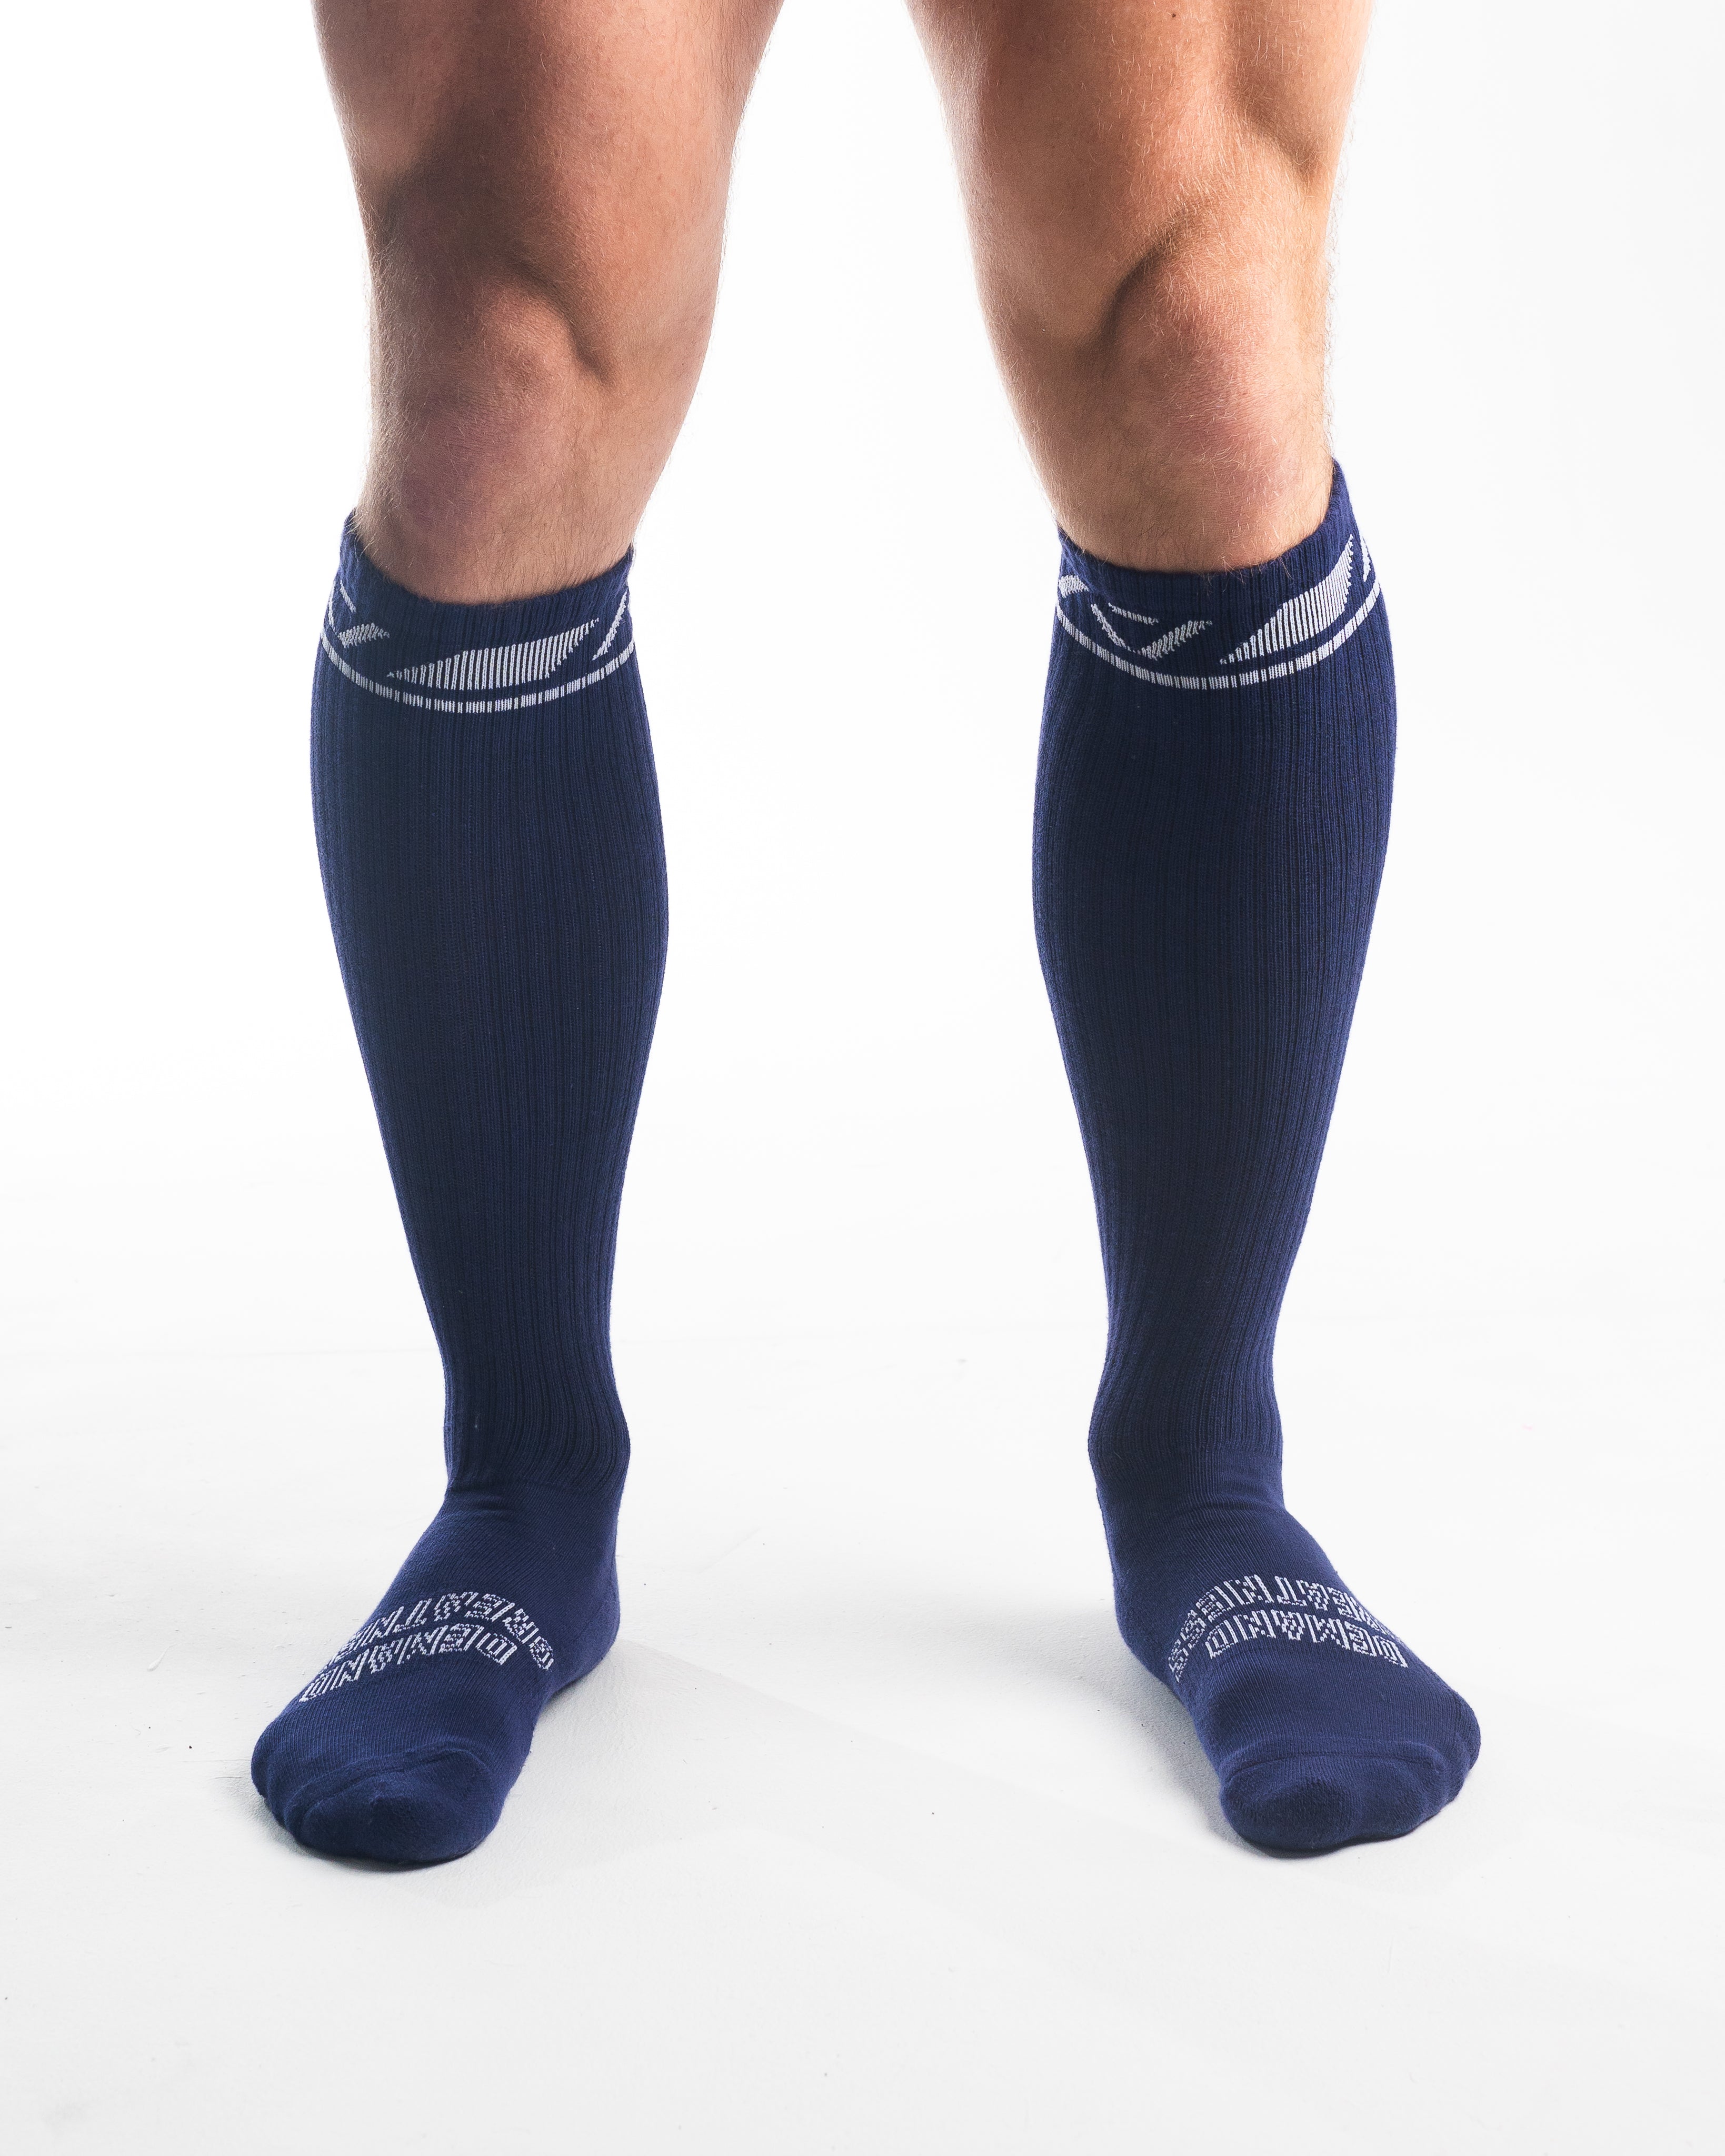 A7 Night Light deadlift socks are designed specifically for pulls and keep your shins protected from scrapes. A7 deadlift socks are a perfect pair to wear in training or powerlifting competition. The A7 IPF Approved Kit includes Powerlifting Singlet, A7 Meet Shirt, A7 Zebra Wrist Wraps, A7 Deadlift Socks, Hourglass Knee Sleeves (Stiff Knee Sleeves and Rigor Mortis Knee Sleeves). All A7 Powerlifting Equipment shipping to UK, Norway, Switzerland and Iceland.